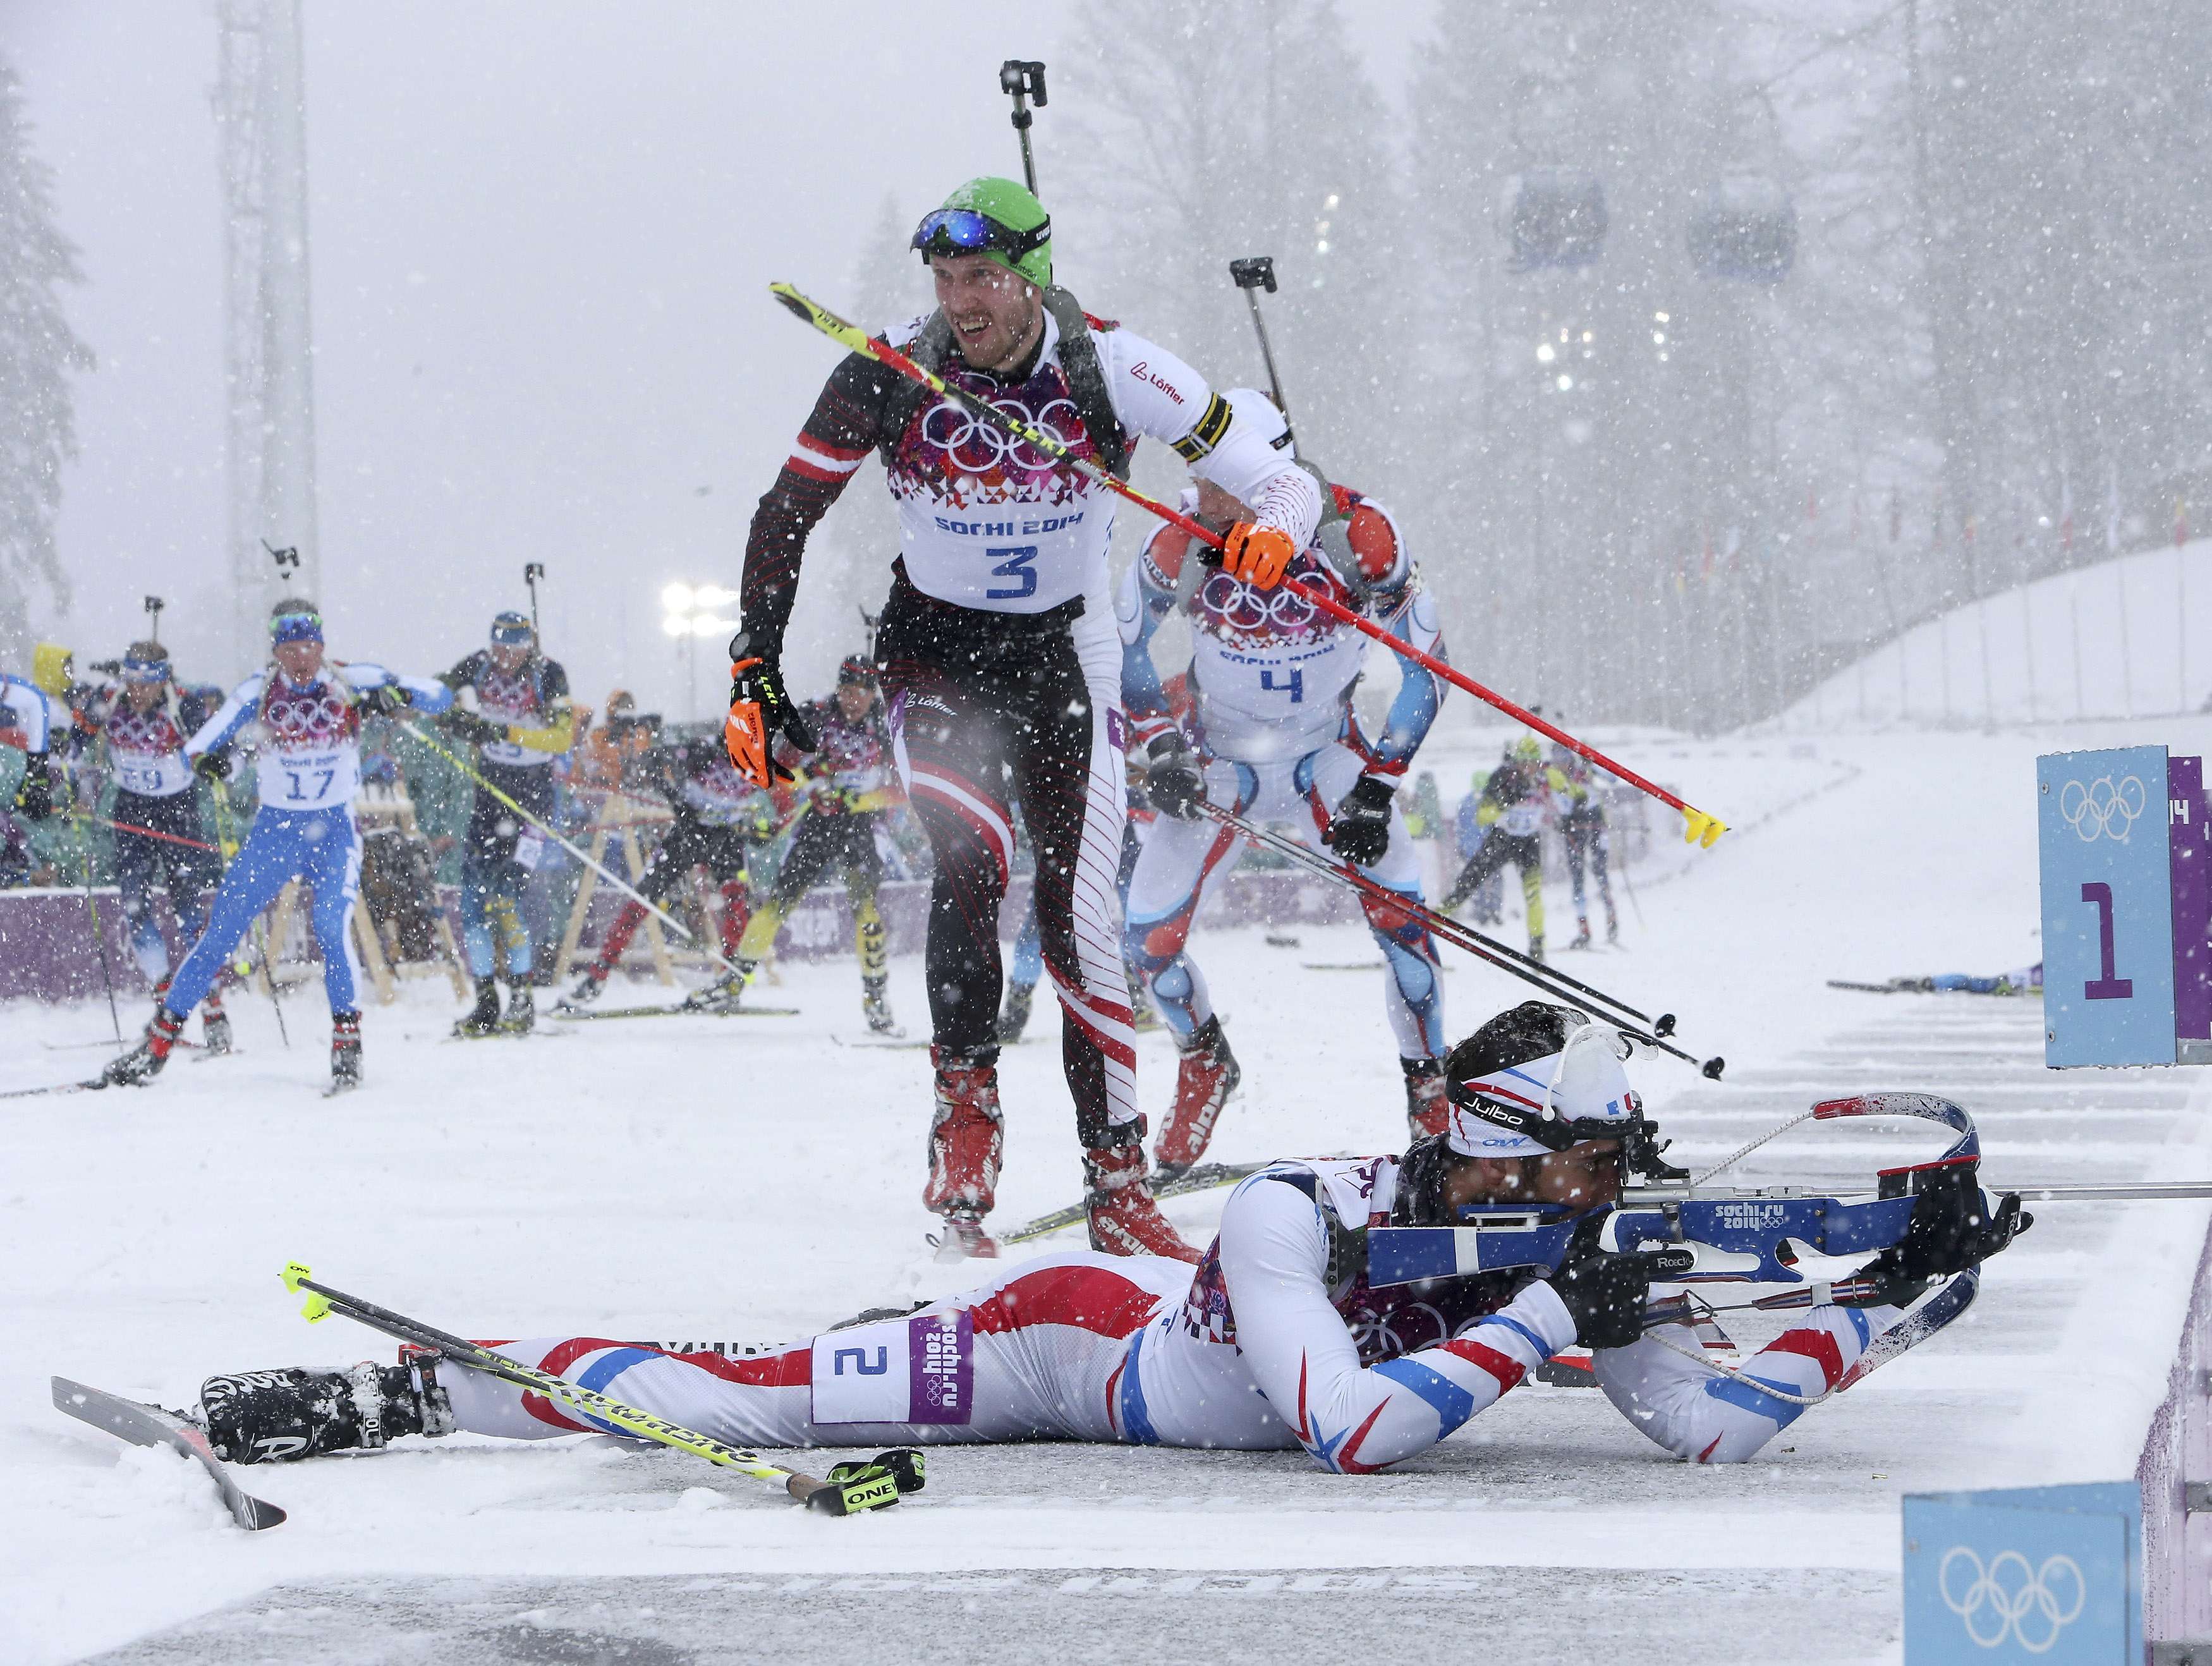 France's Martin Fourcade (bottom) shoots as Austria's Dominik Landertinger (C) leaves the shooting range during the men's biathlon 15km mass start event at the Sochi 2014 Winter Olympics in Rosa Khutor February 18, 2014. REUTERS/Sergei Karpukhin (RUSSIA - Tags: SPORT BIATHLON OLYMPICS TPX IMAGES OF THE DAY) ATTENTION EDITORS: PICTURE 04 OF 20 FOR PACKAGE 'SOCHI - EDITOR'S CHOICE' TO FIND ALL SEARCH 'EDITOR'S CHOICE - 18 FEBRUARY 2014' ORG XMIT: PXP04